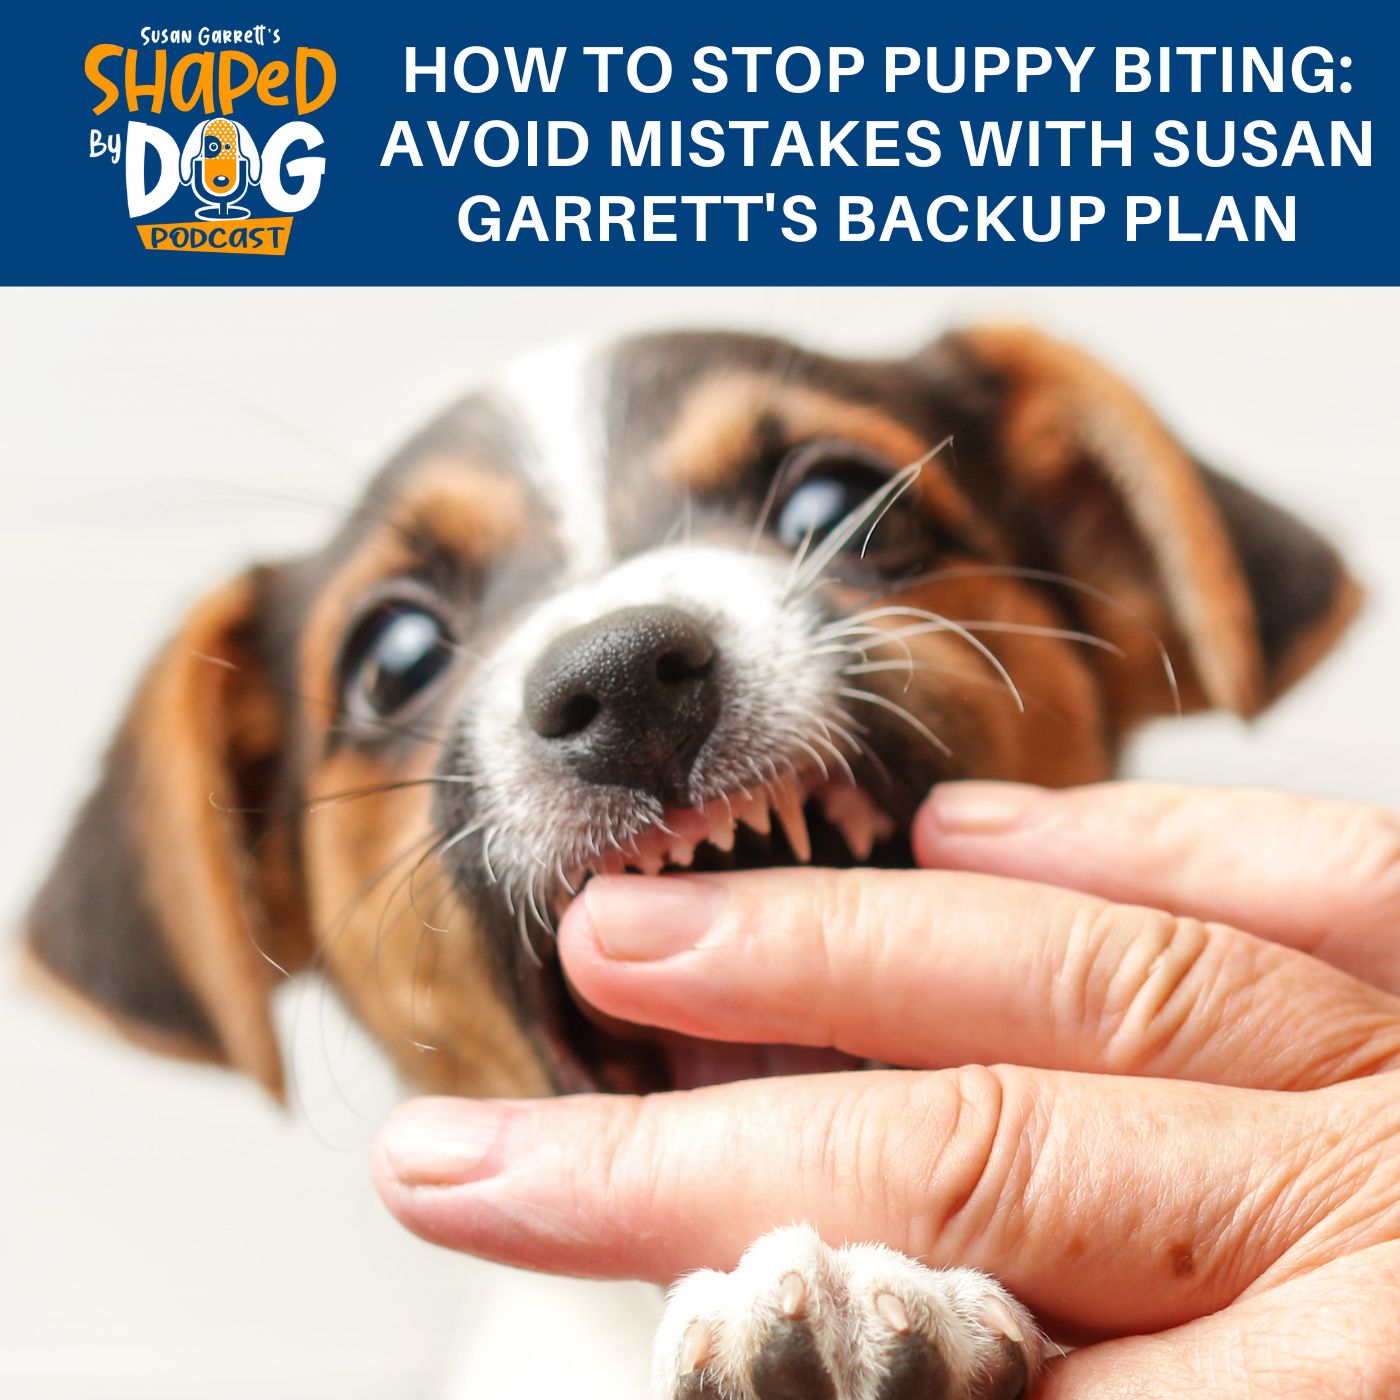 Episode: #234 - How To Stop Puppy Biting: Avoid Mistakes With Susan Garrett’s Backup Plan